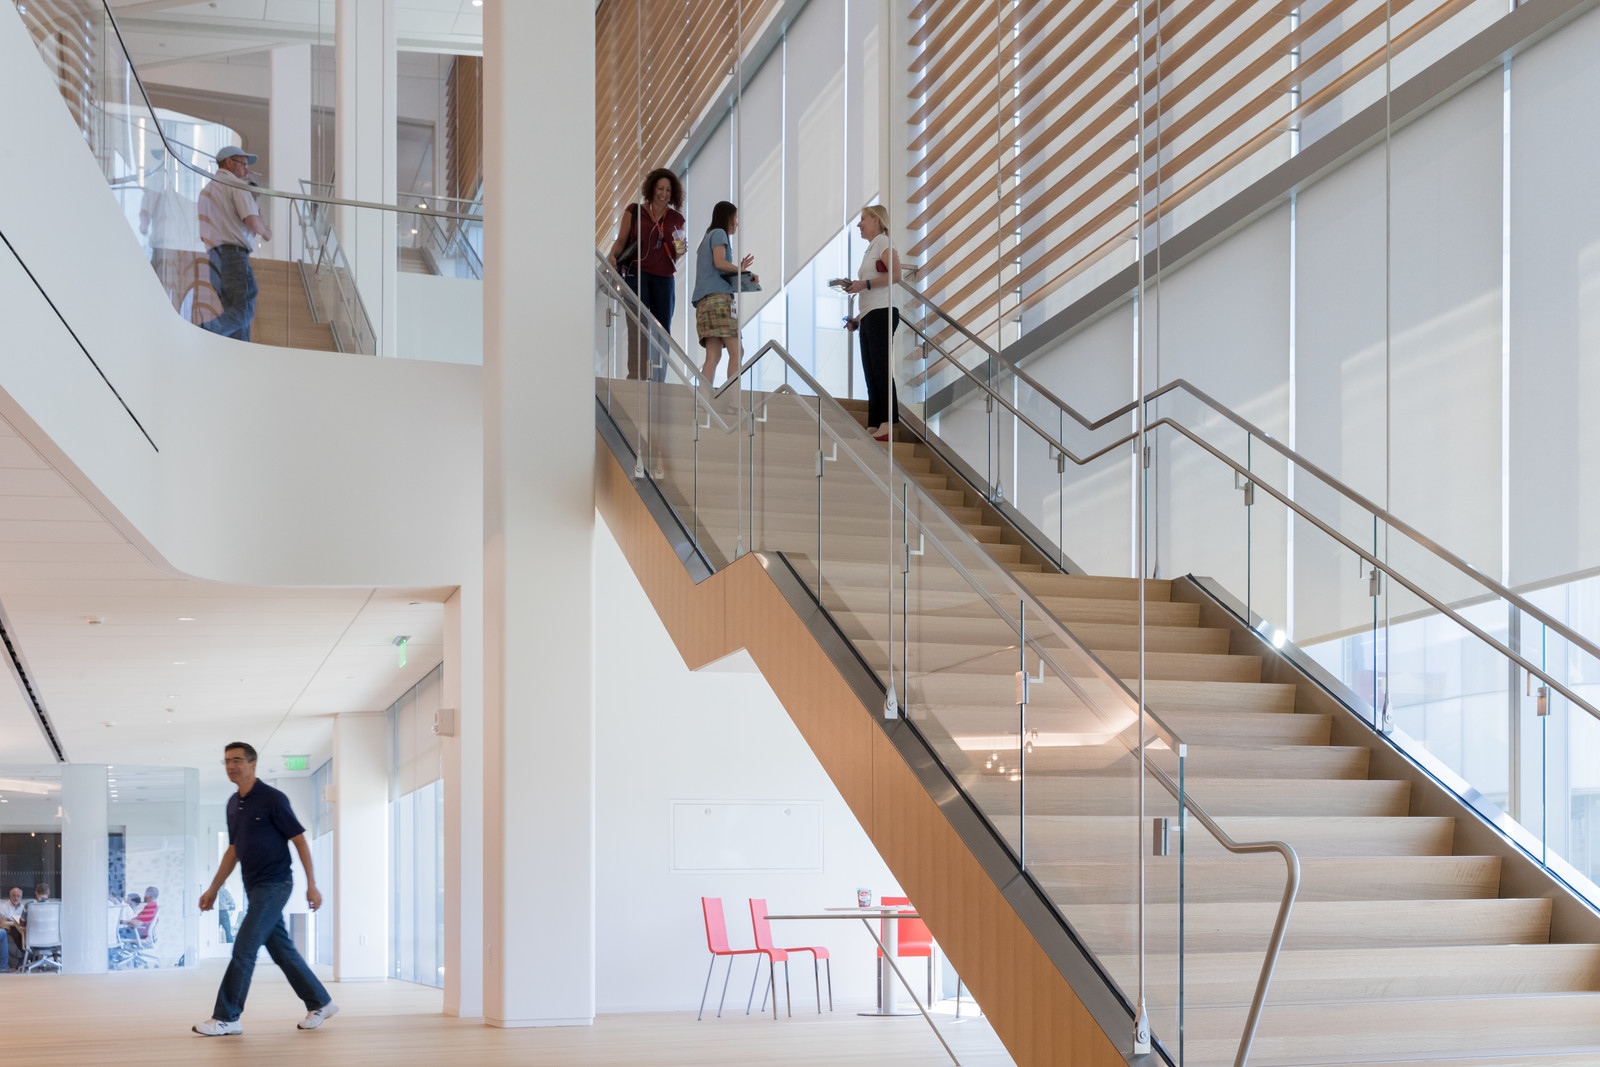 This integral stair is a key feature to foster the collaborative culture at Novartis by joining the floors together. The custom wood-slat louvers creates a natural and warm way to block light. 